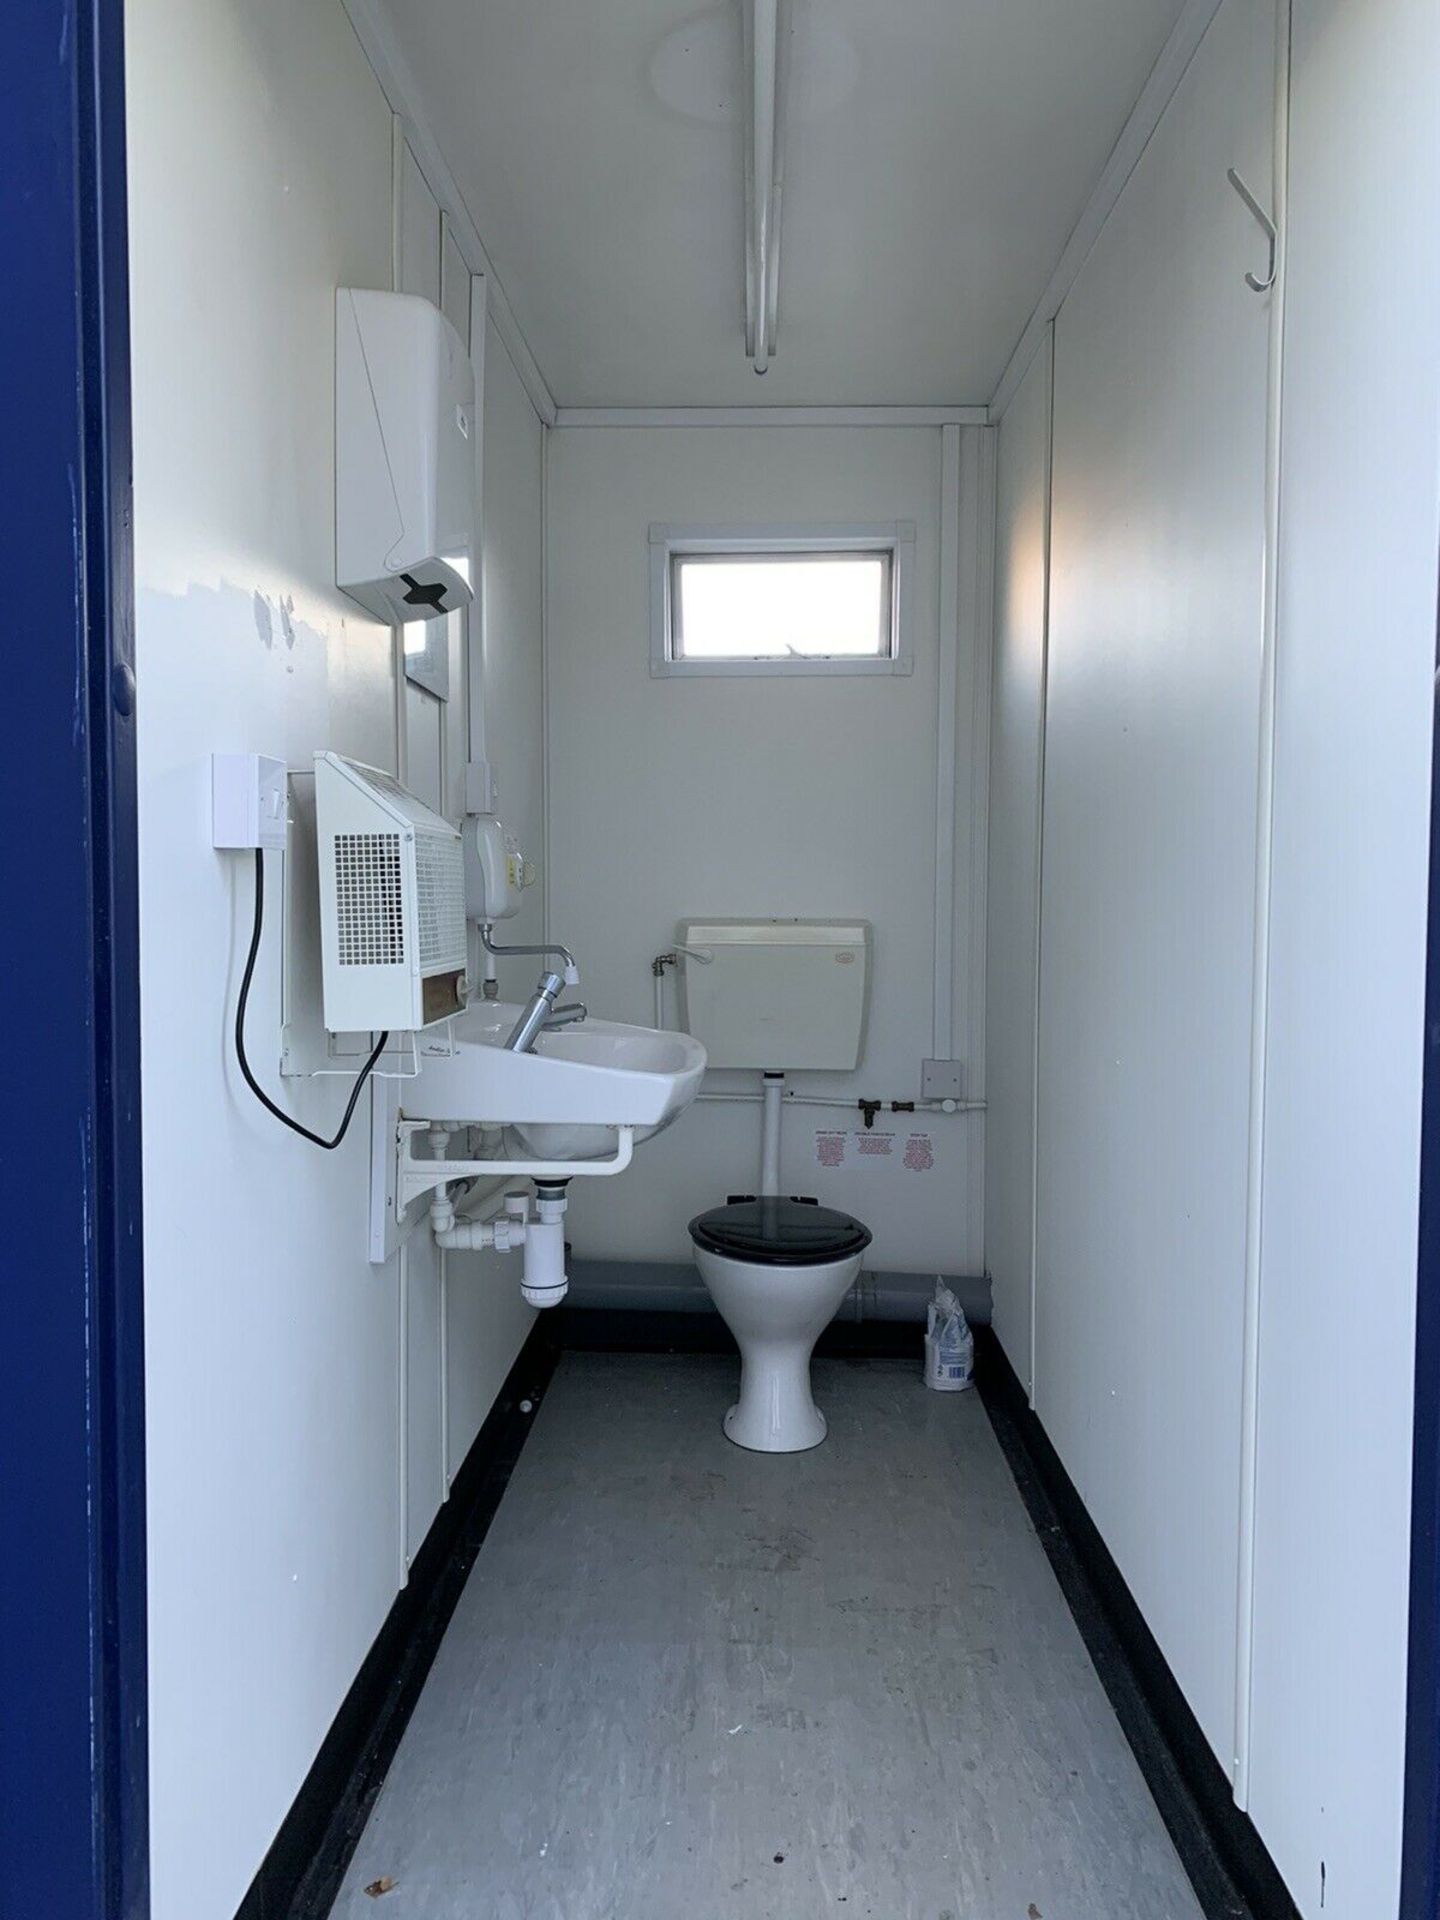 Portable Toilet Block Site Loo Cabin Steel Contain - Image 3 of 9